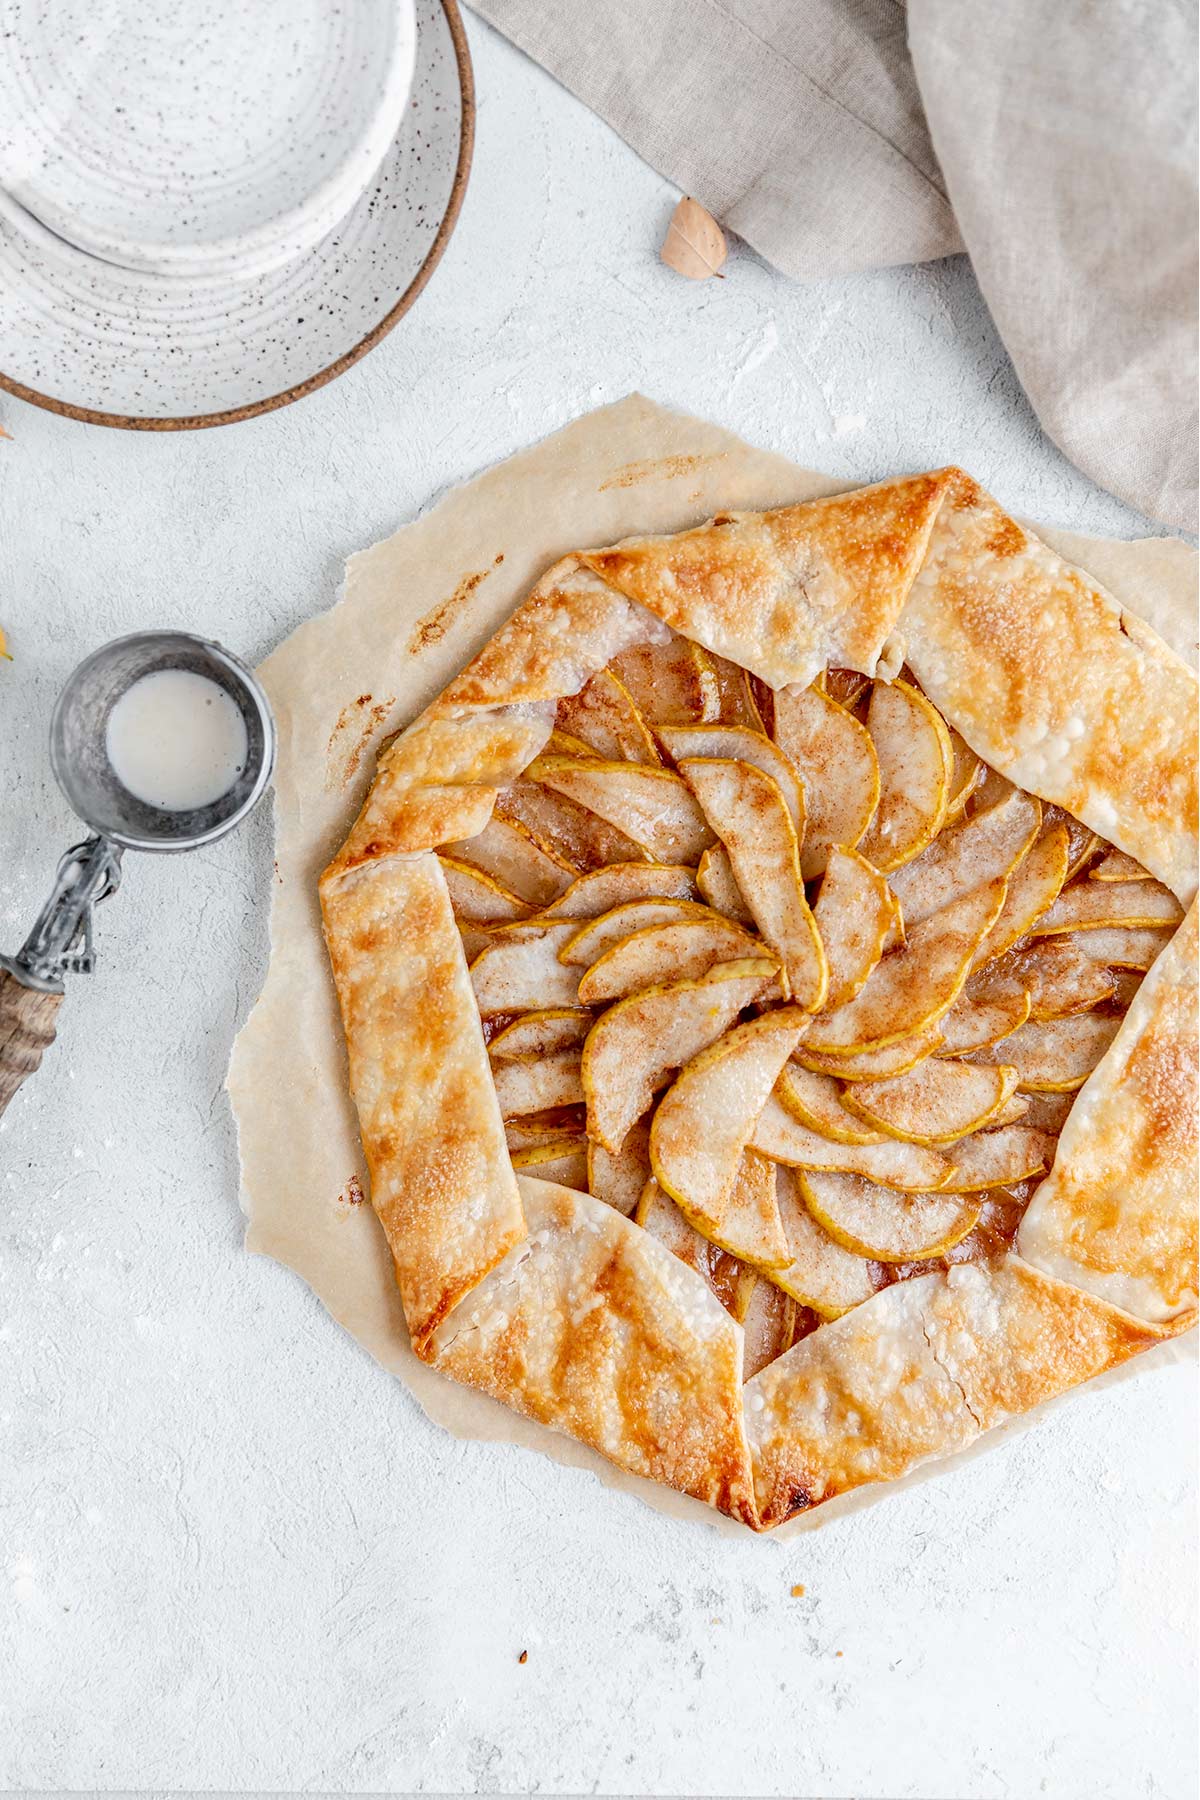 F for Food: Go, go Galette